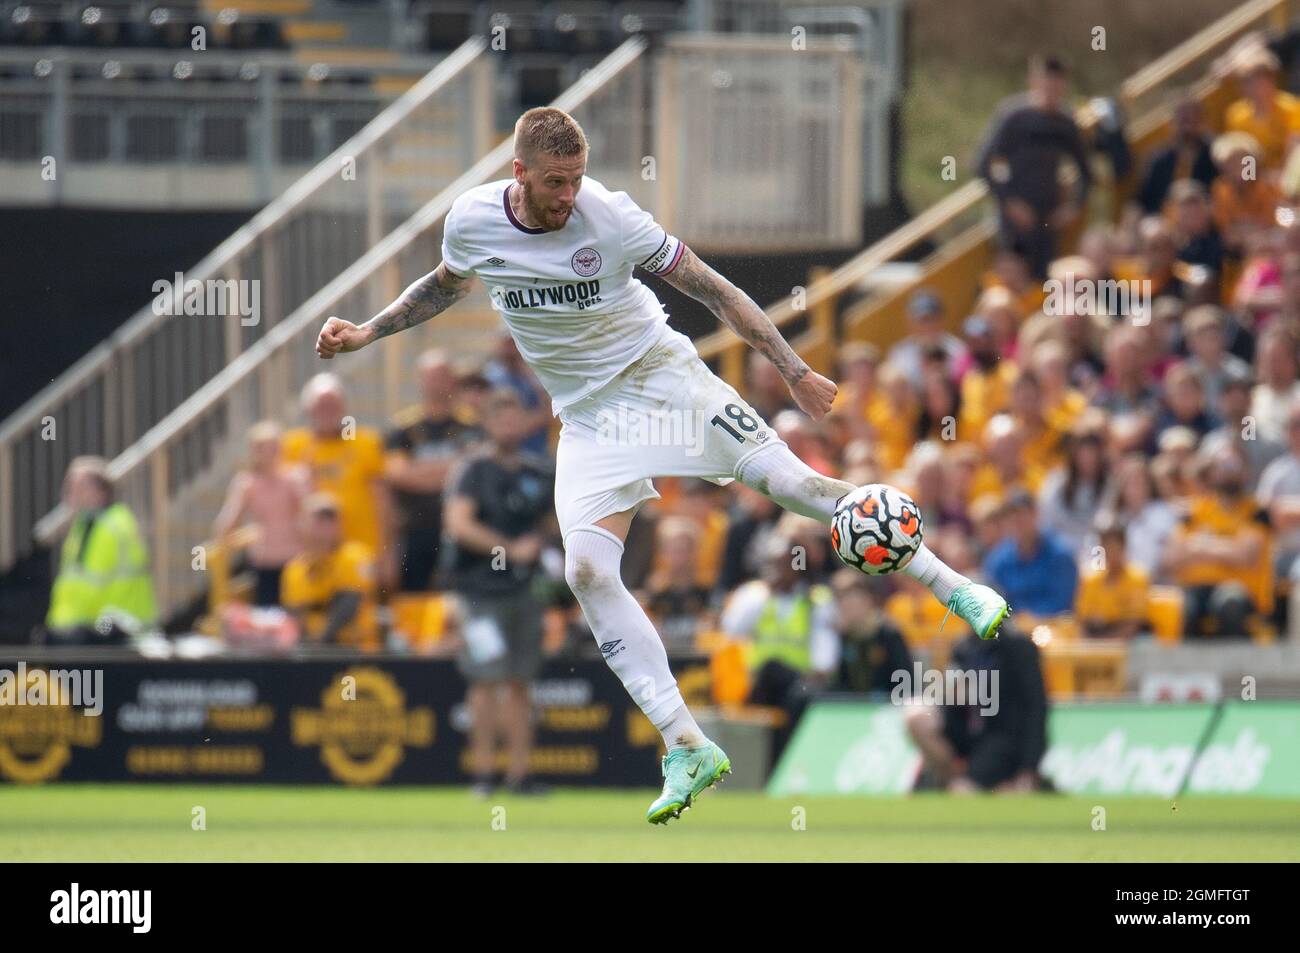 Wolverhampton, UK. 18th Sep, 2021. Brentford Pontus Jansson during the Premier League match between Wolverhampton Wanderers and Brentford at Molineux, Wolverhampton, England on 18 September 2021. Photo by Andrew Aleksiejczuk/PRiME Media Images. Credit: PRiME Media Images/Alamy Live News Stock Photo